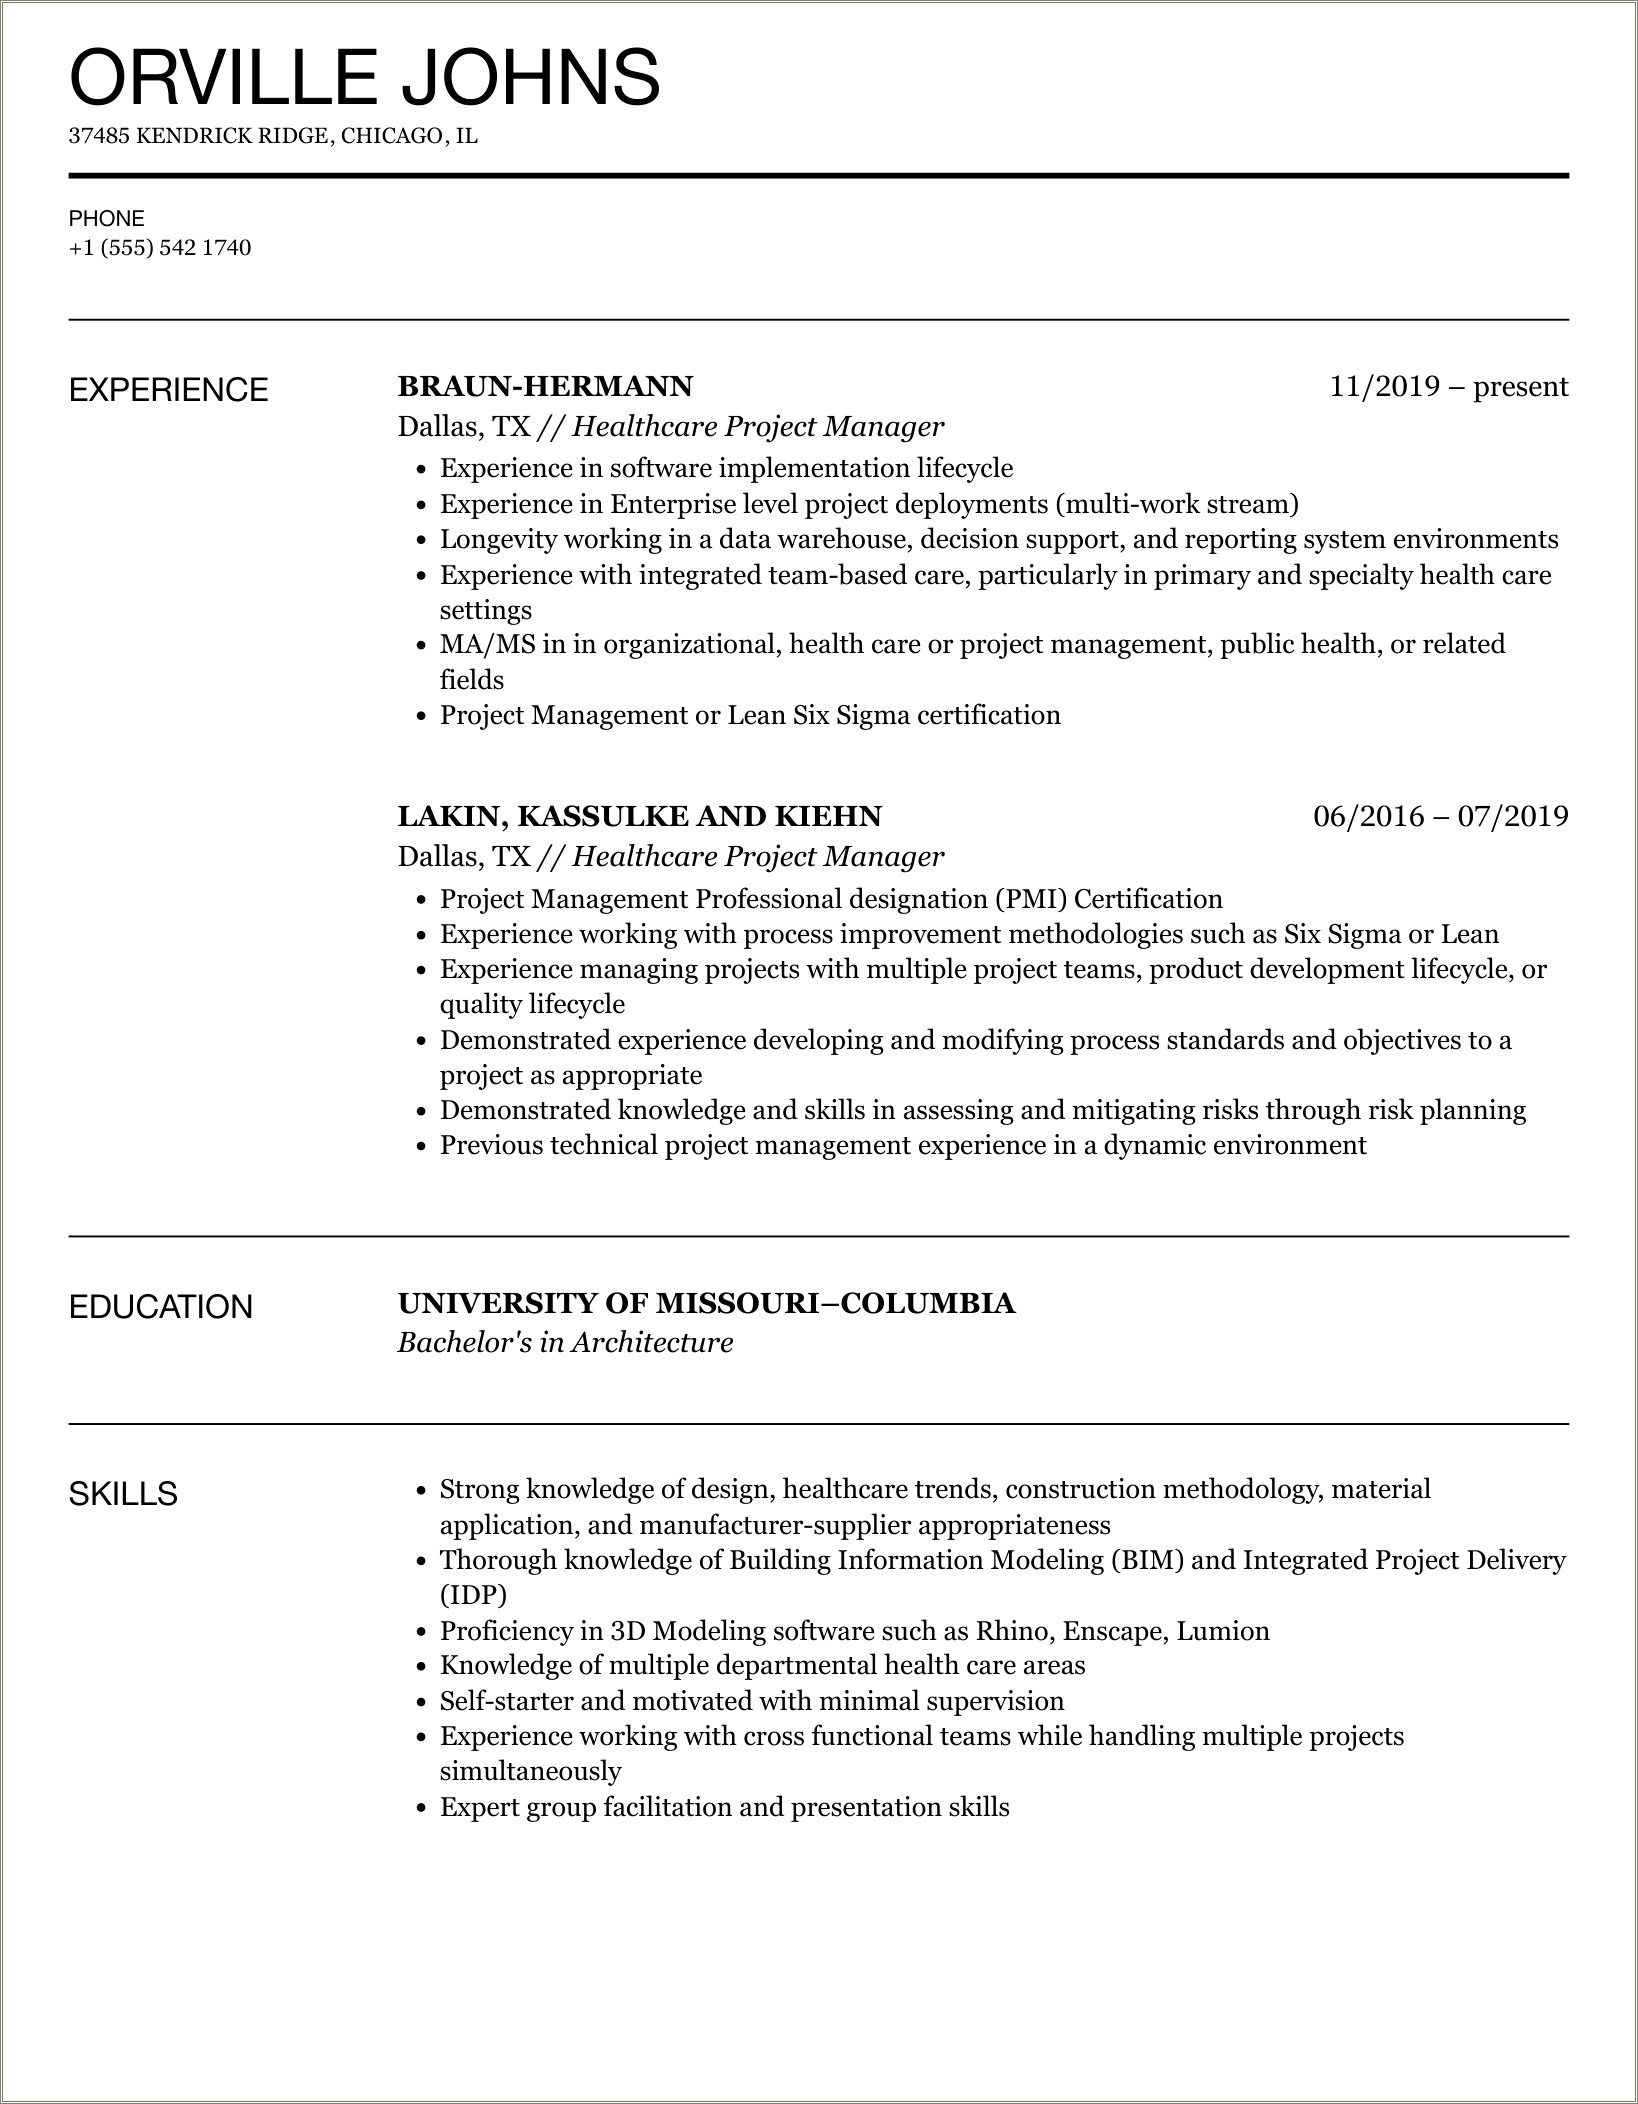 Project Manager Resume Sample Population Health